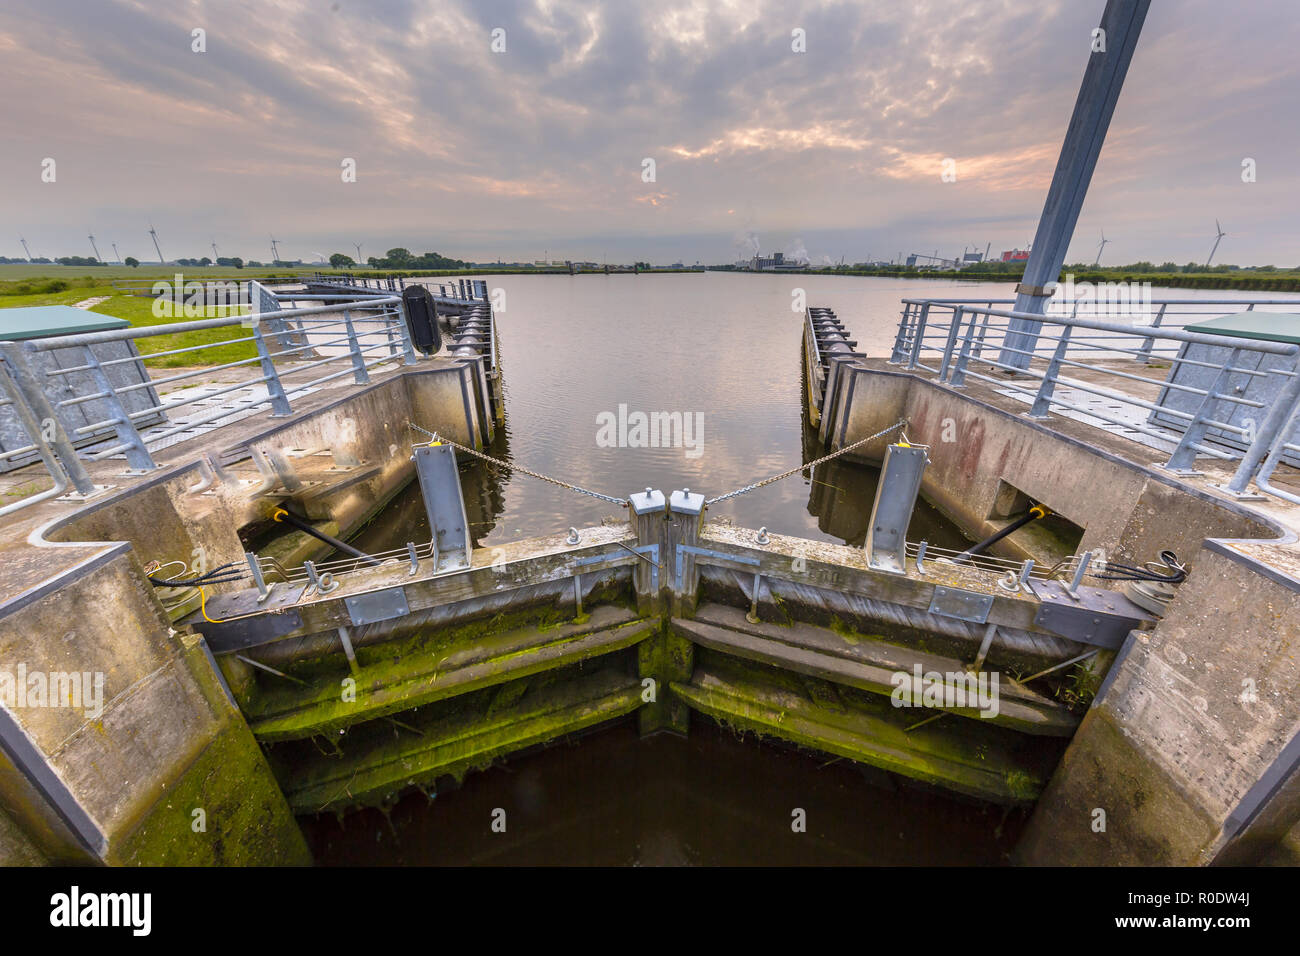 Locking chamber in a major waterway. These kind of facilities are one of the key elements in dutch water management. Stock Photo